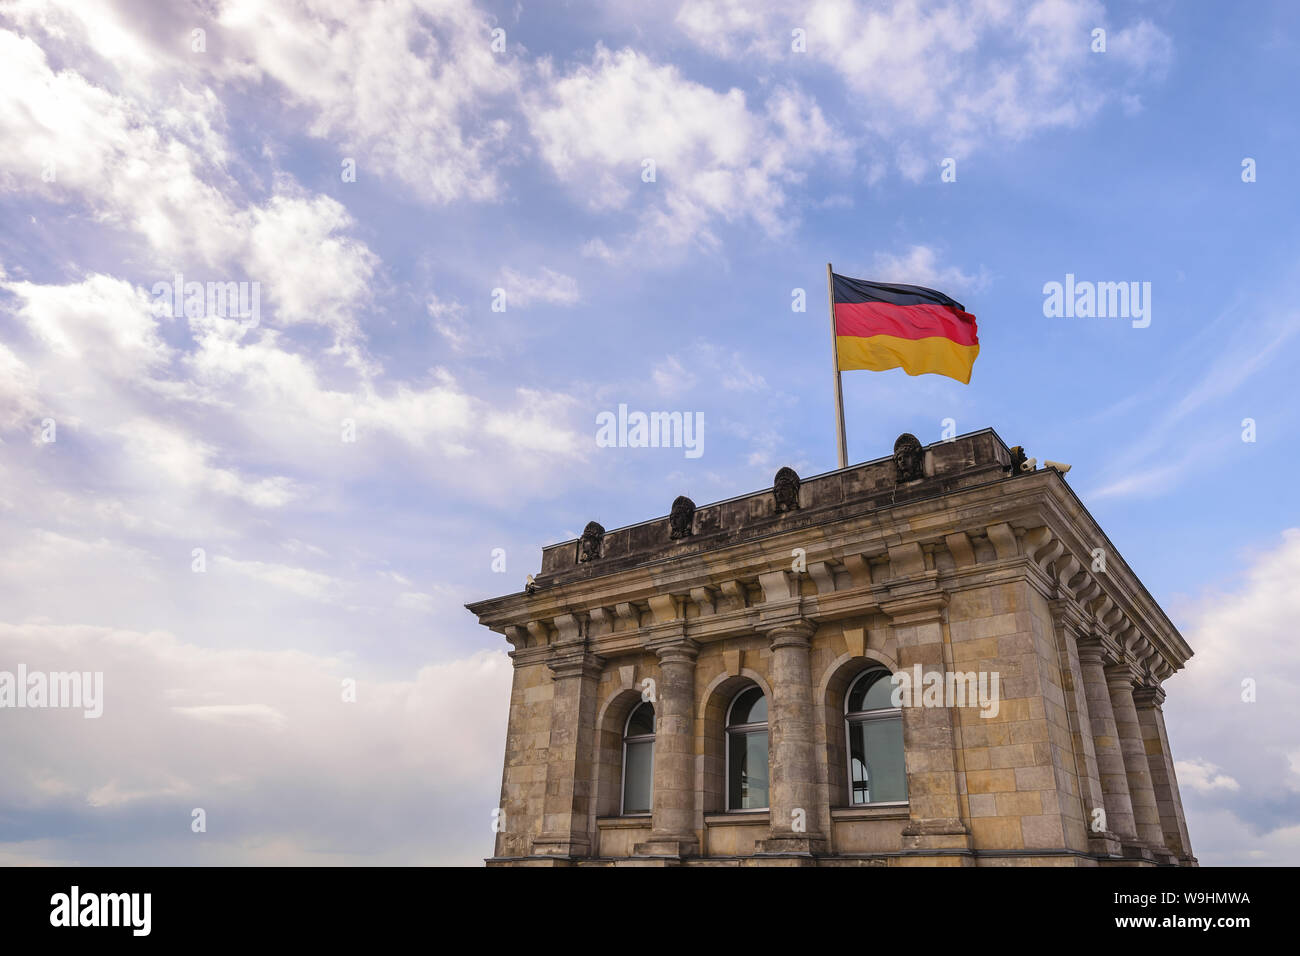 Berlin Germany, German flag at Reichstag German Parliament Building Stock Photo